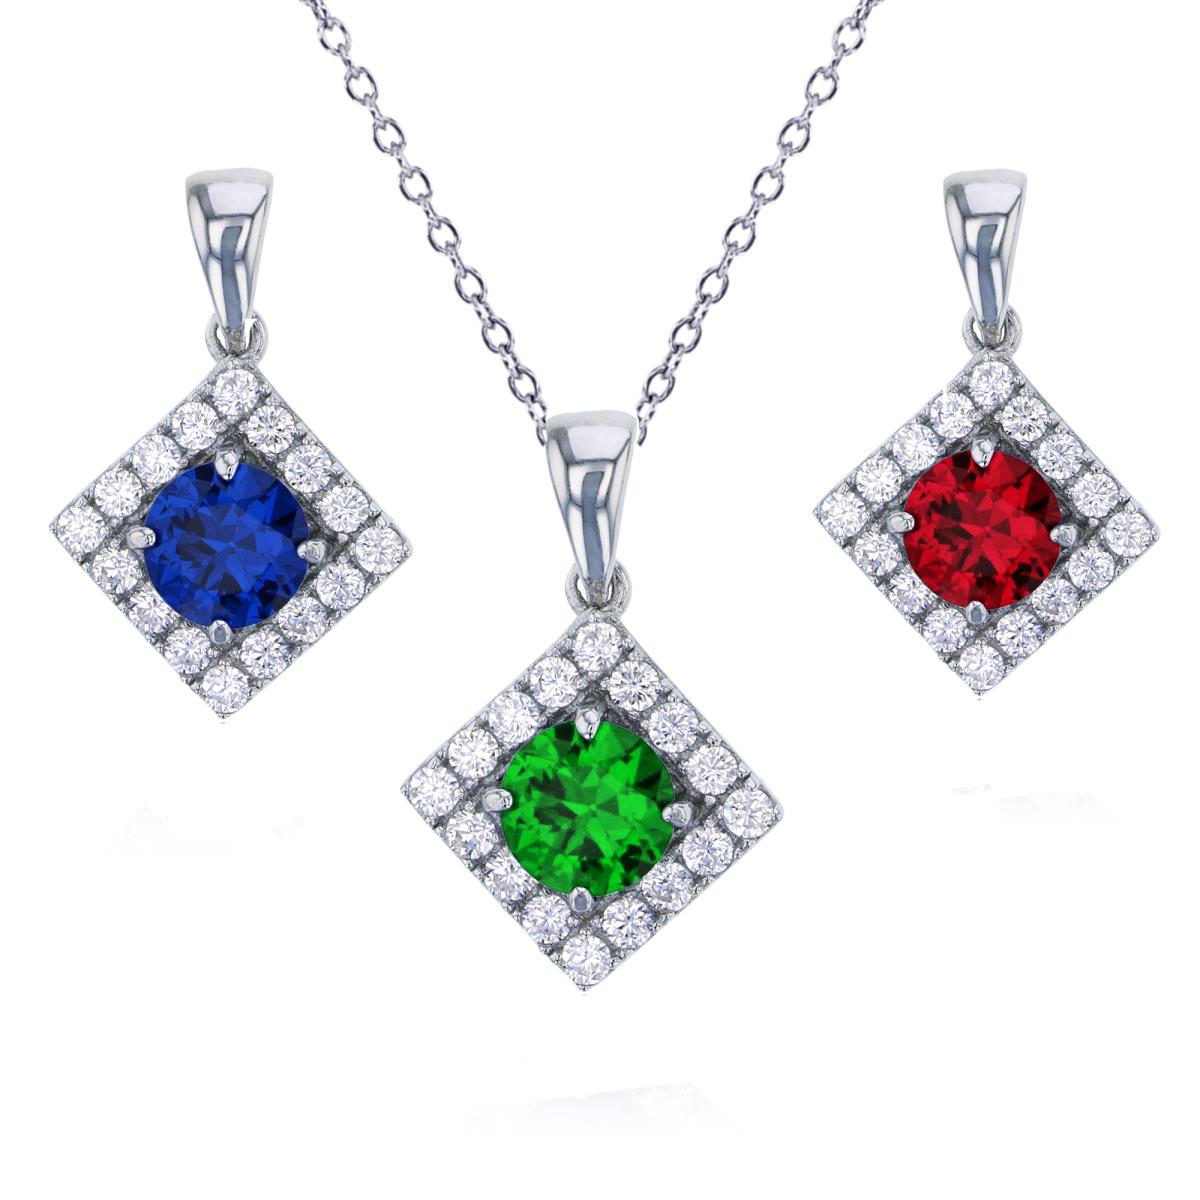 Sterling Silver Rhodium Pave 6mm Rd Green, Sapphire & Ruby CZ Square Pendant Set with 18" Rollo Chain